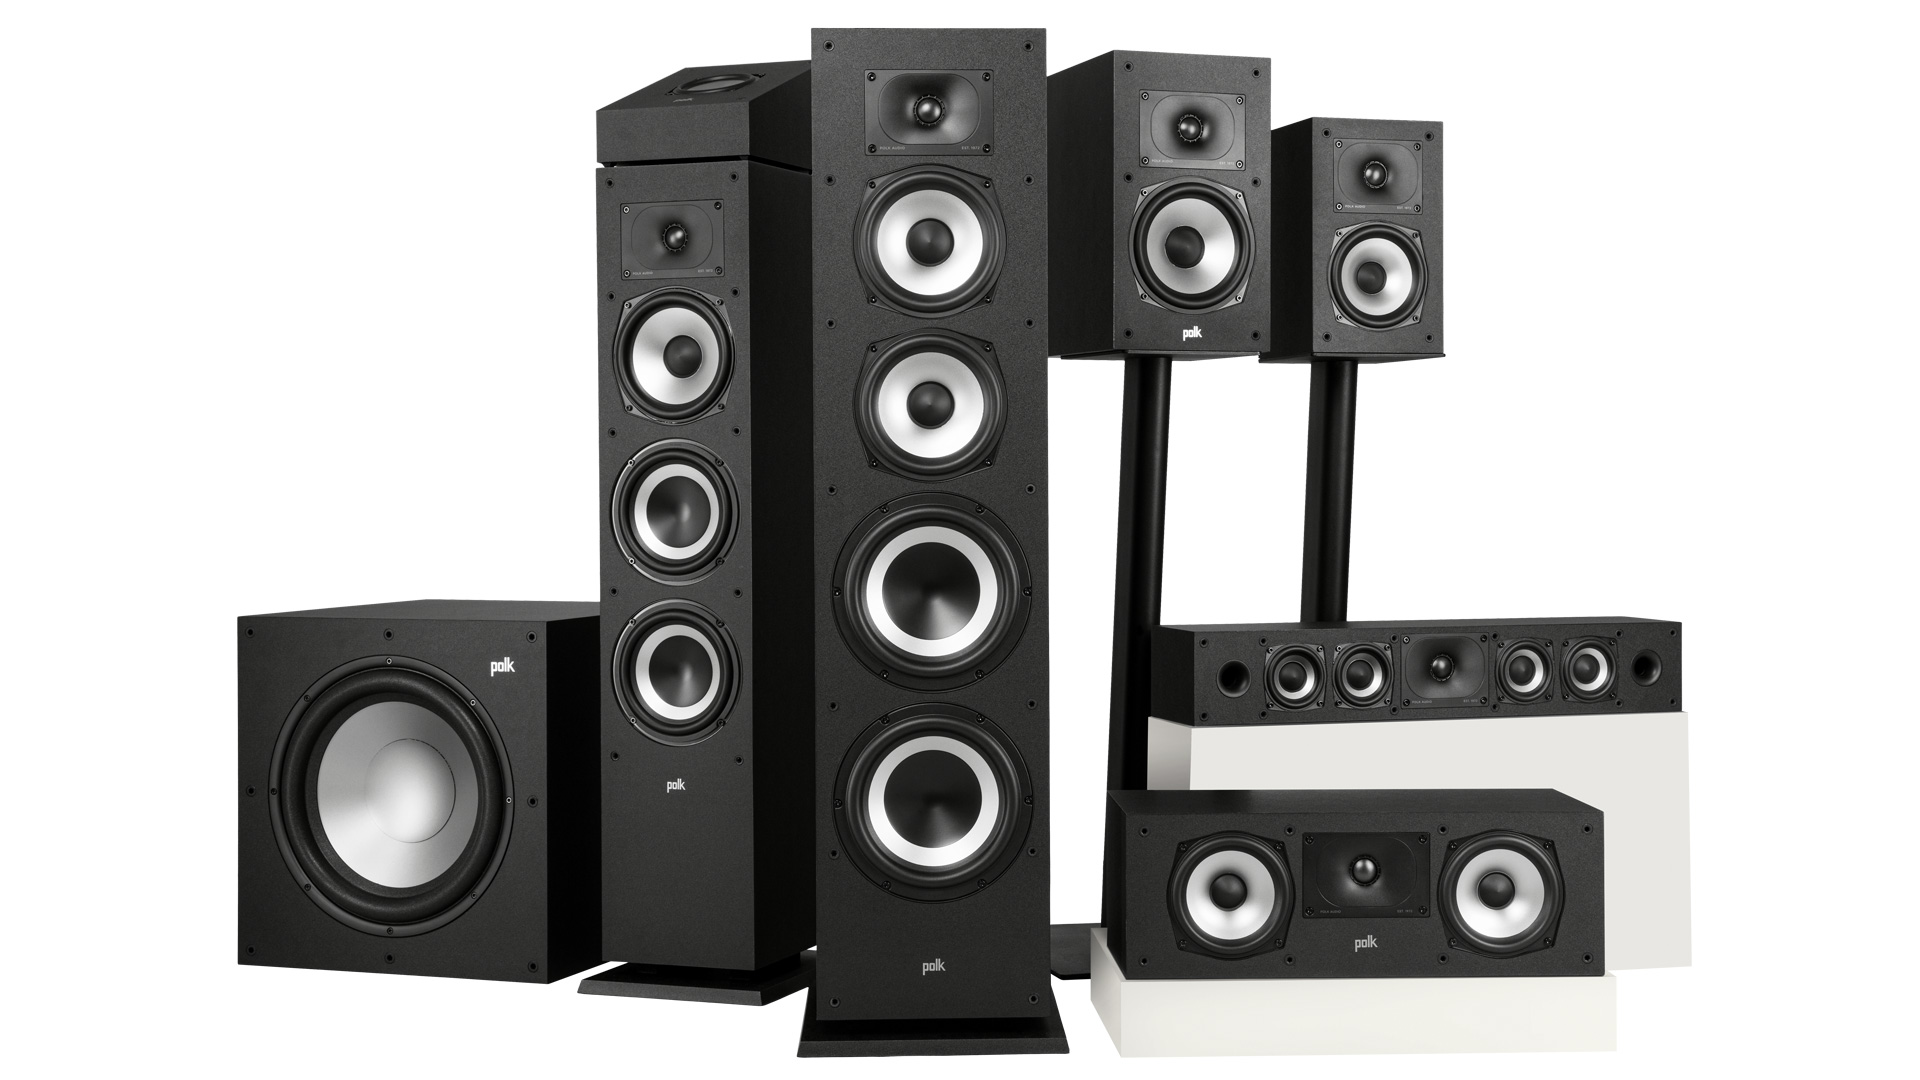 The new Monitor XT Series from Polk Audio (Image Credit: Polk Audio/Sound United)